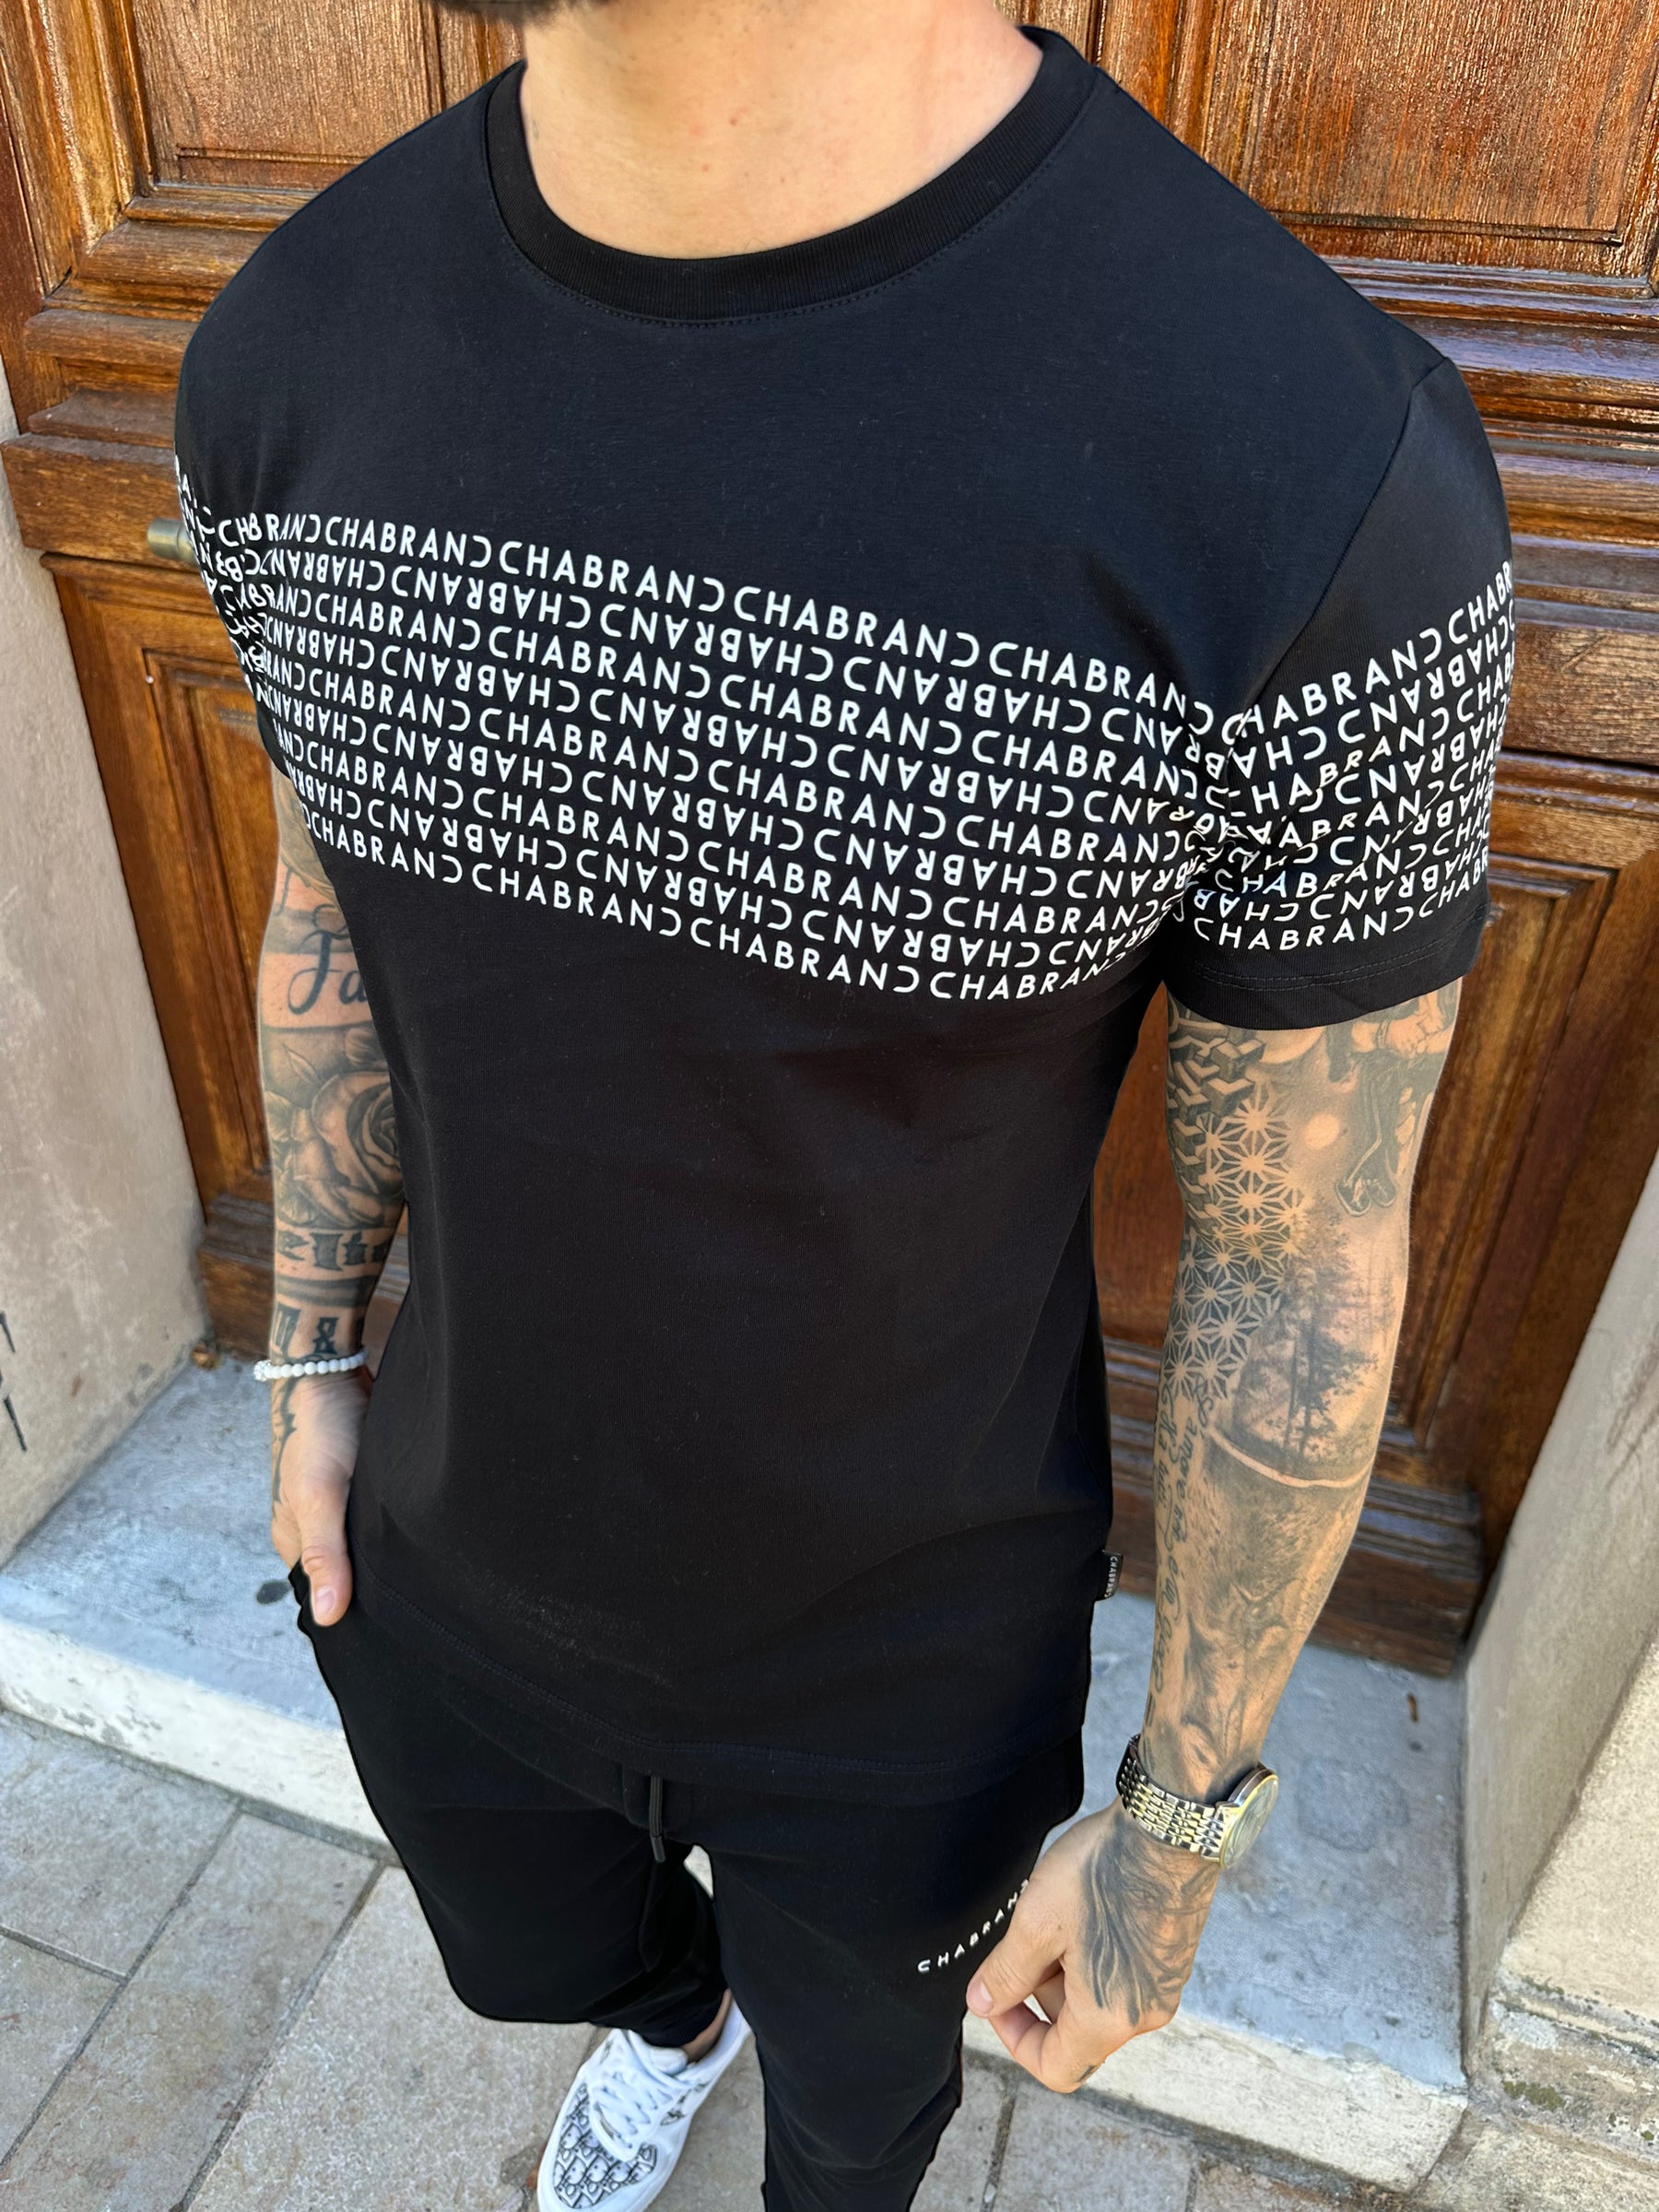 CHABRAND - Black t-shirt with mosaic sign